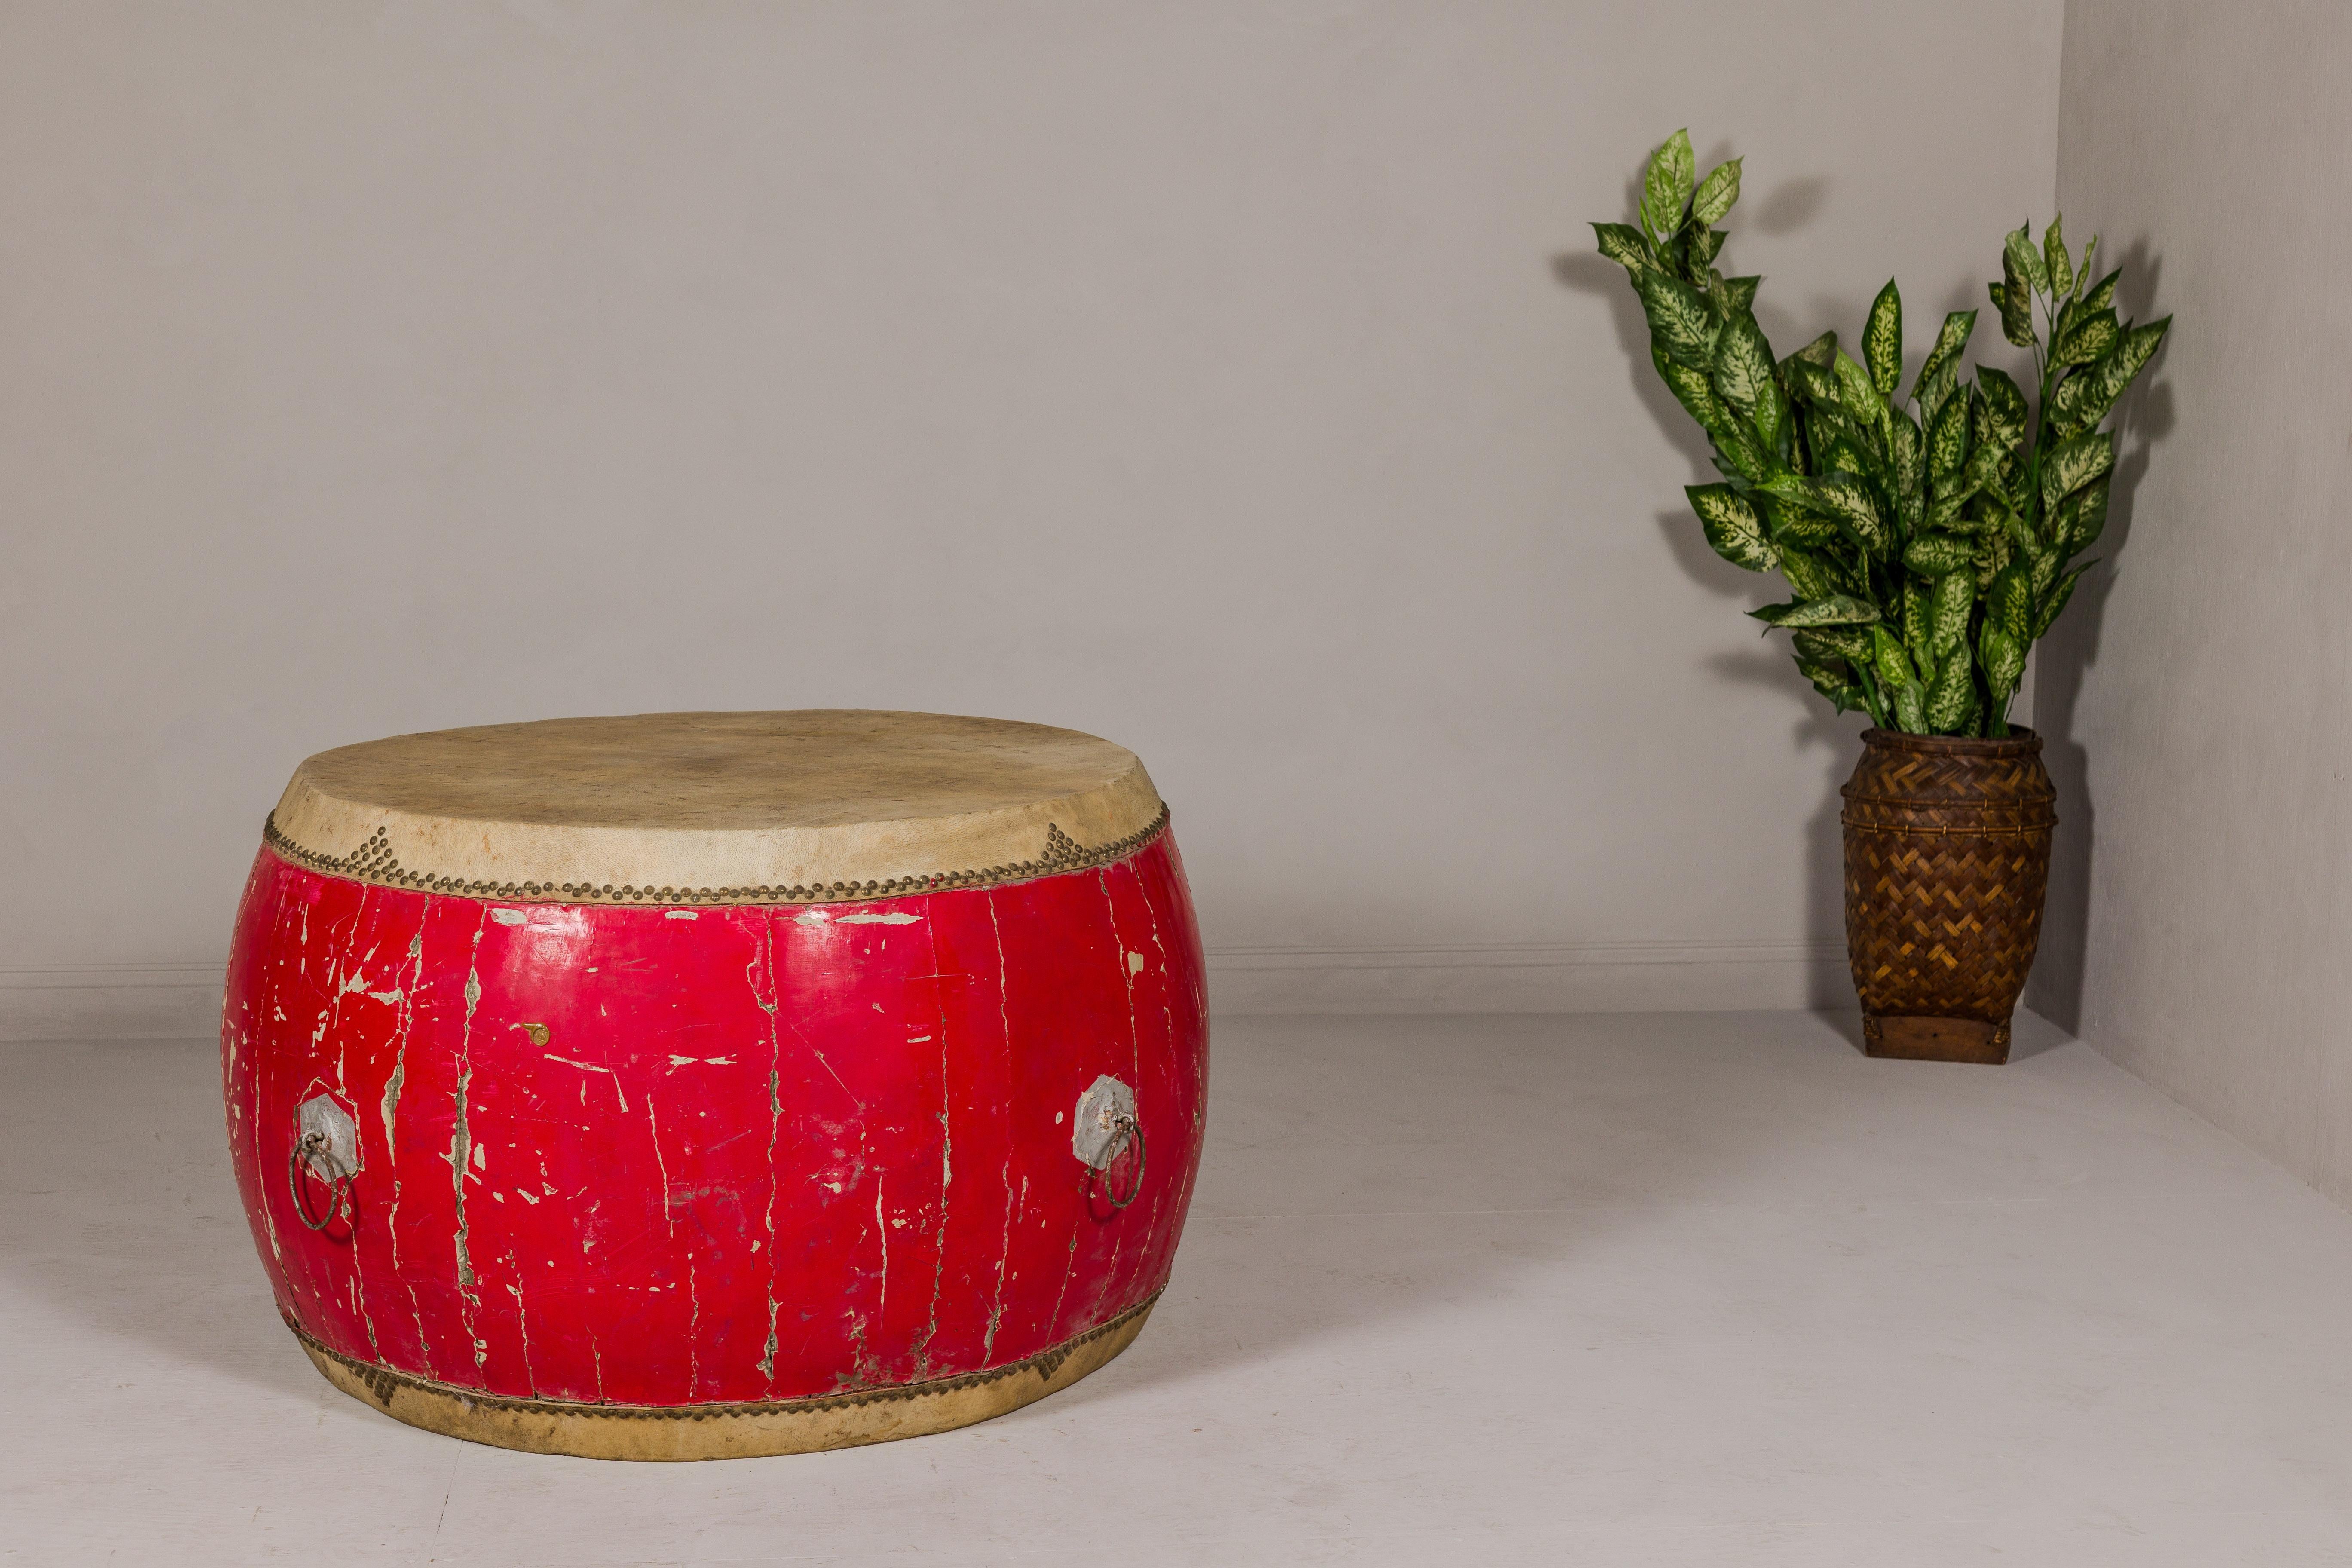 A late Qing Dynasty period red lacquered opera drum with brass studs, hide drumhead and four iron handles. This late Qing Dynasty period opera drum is a magnificent piece, steeped in history and bursting with character. Crafted with precision and